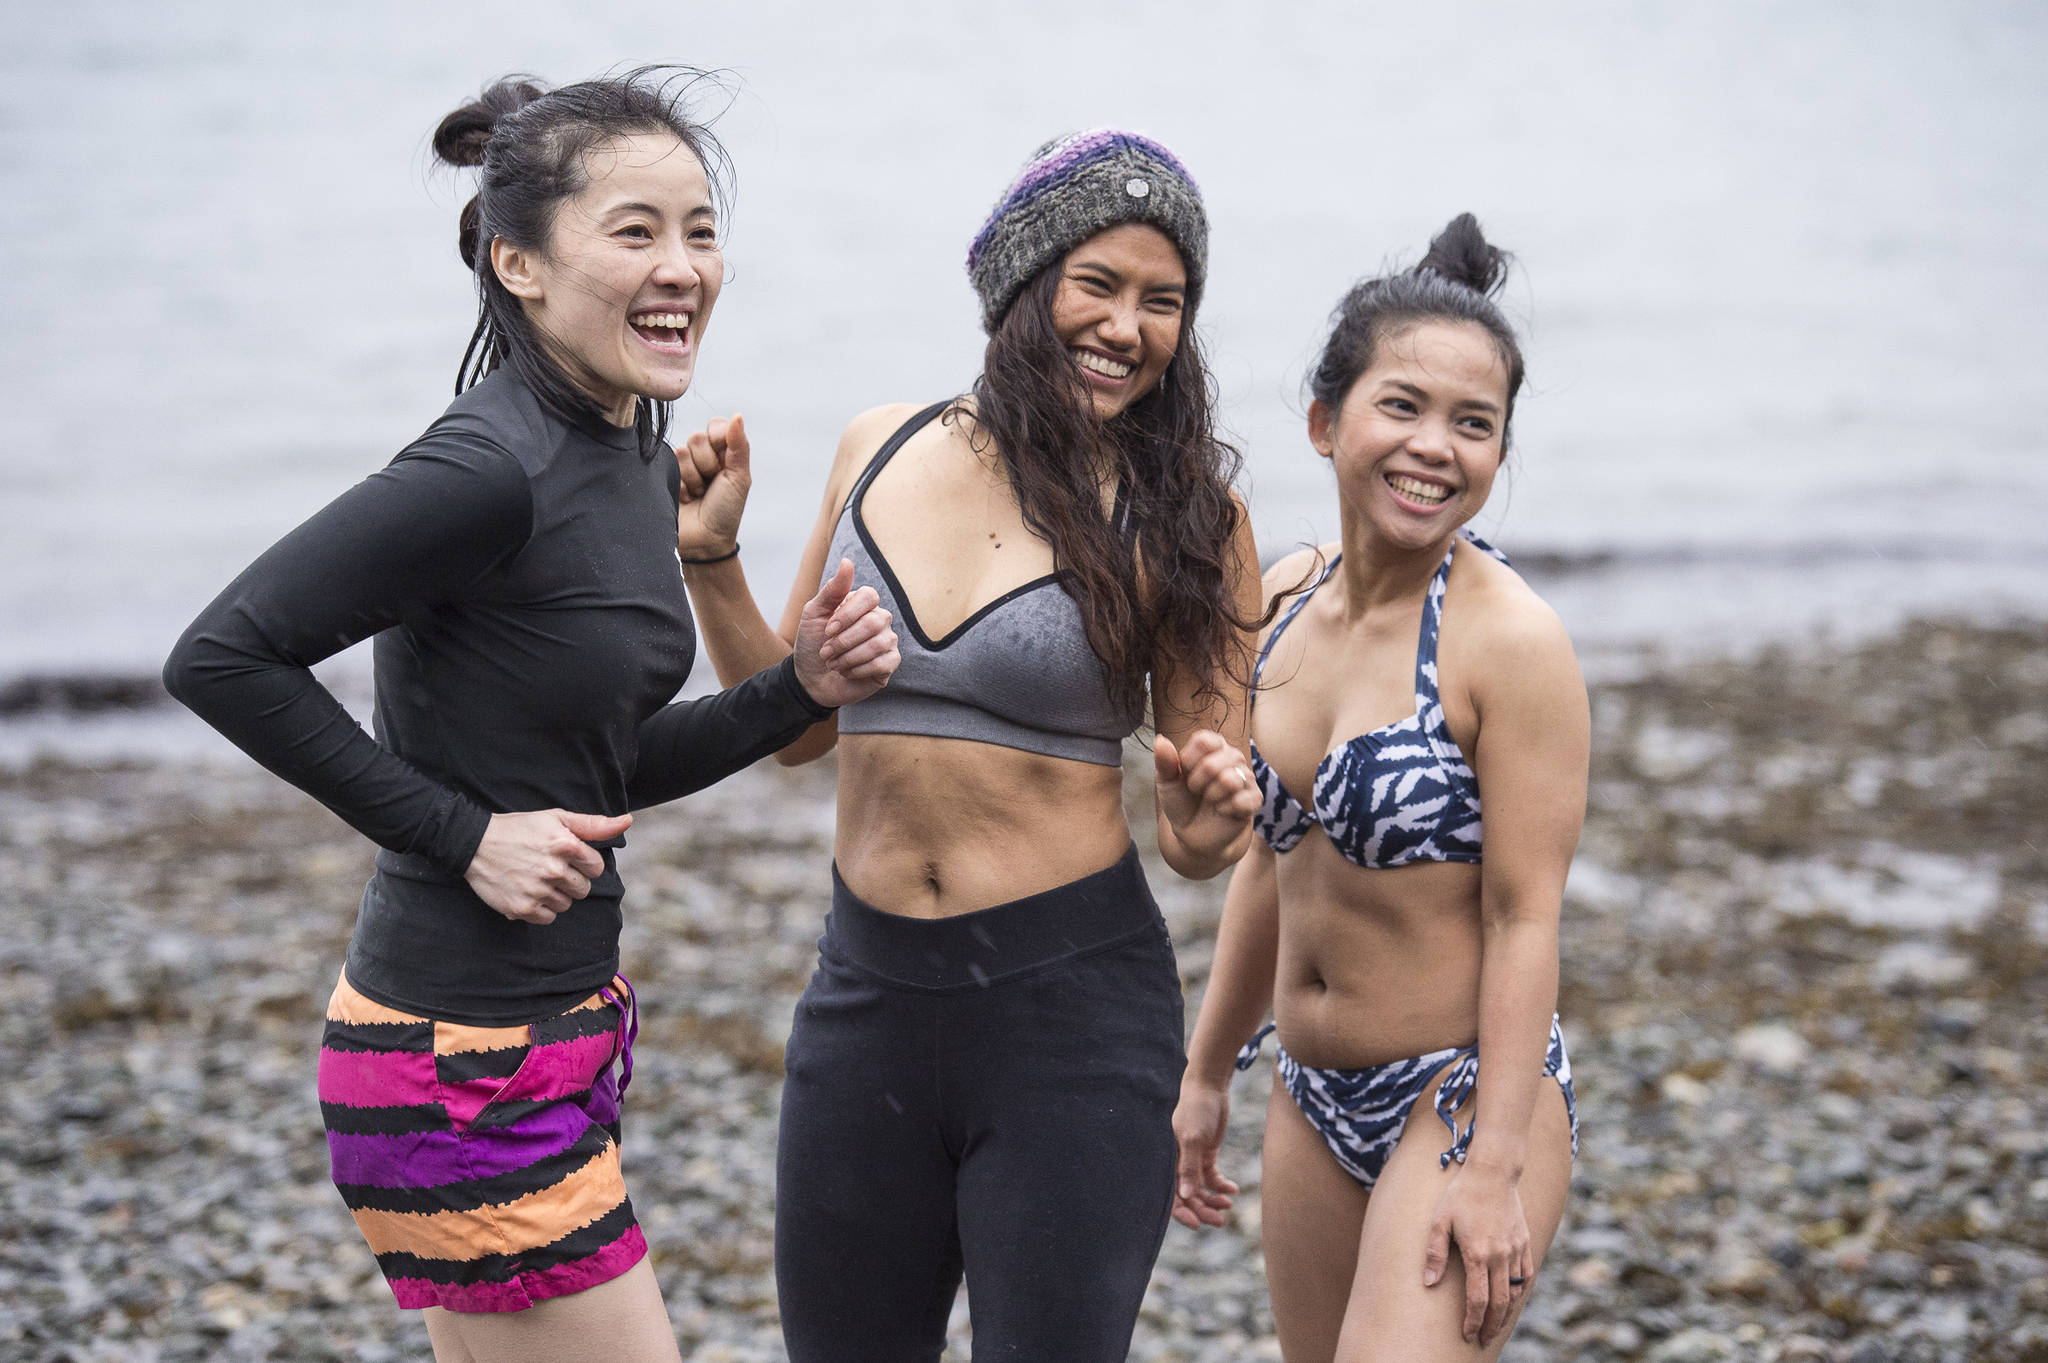 Juneau residents prepare themselves for the annual Juneau Polar Bear Dip at Auke Bay Recreation Area on Tuesday, Jan. 1, 2019. Nearly 200 people took the plunge to start off the new year. (Michael Penn | Juneau Empire)